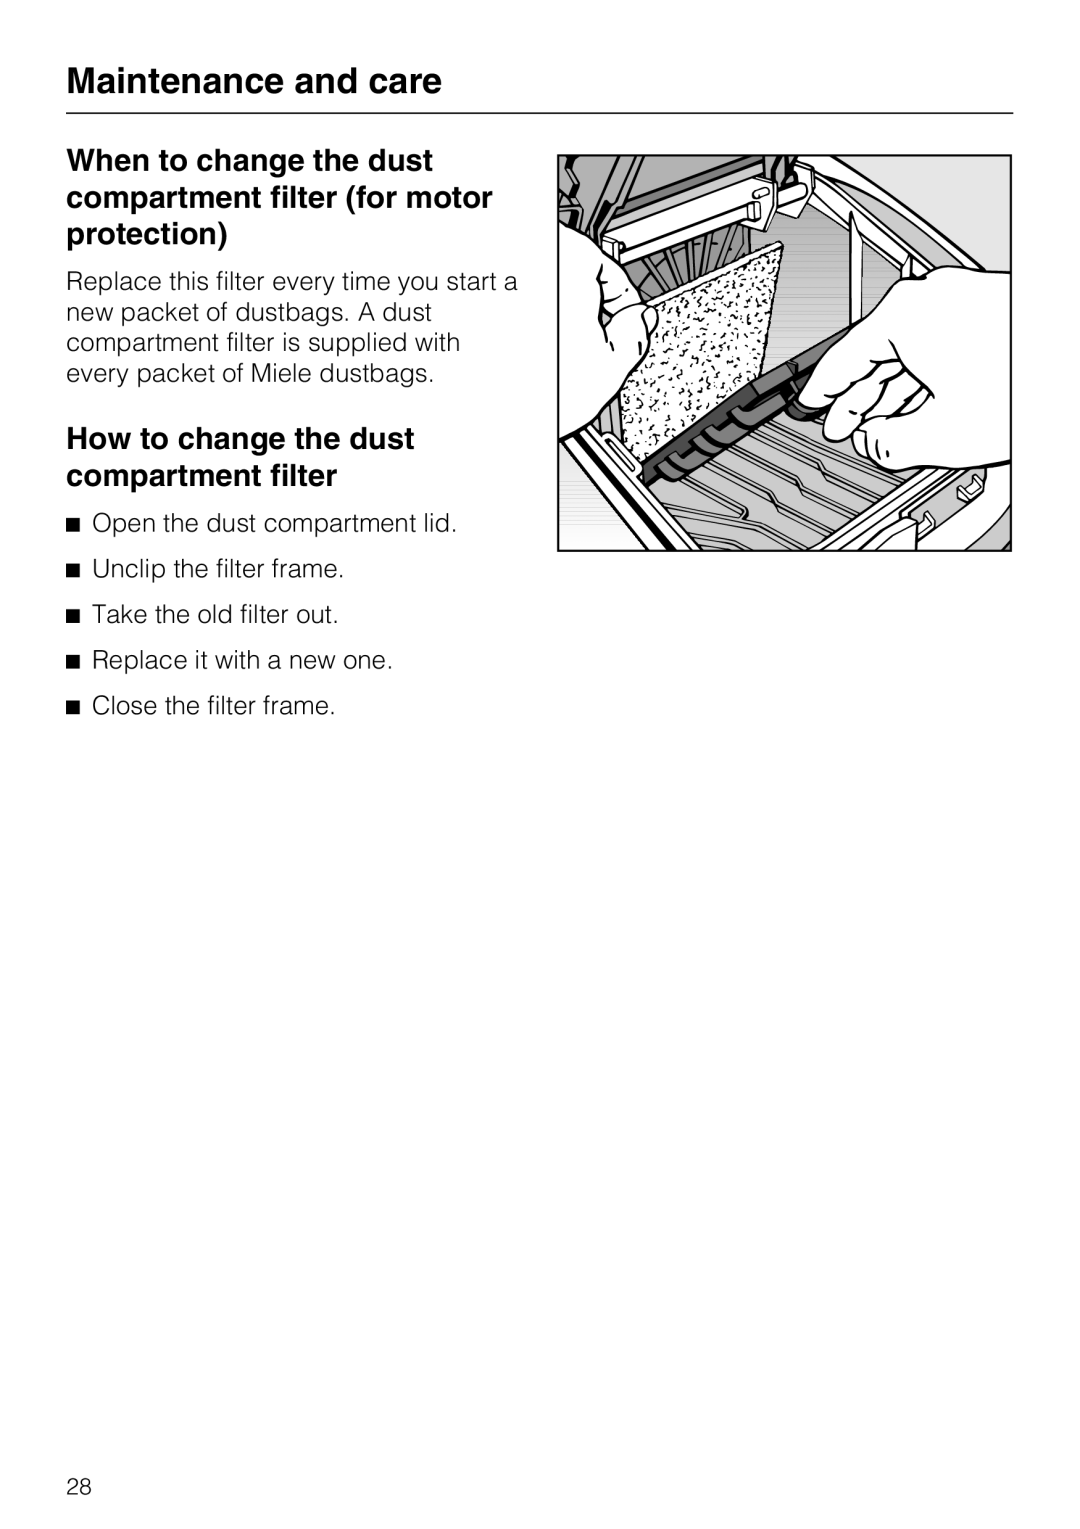 Miele S4212 manual How to change the dust compartment filter, Maintenance and care, Open the dust compartment lid 